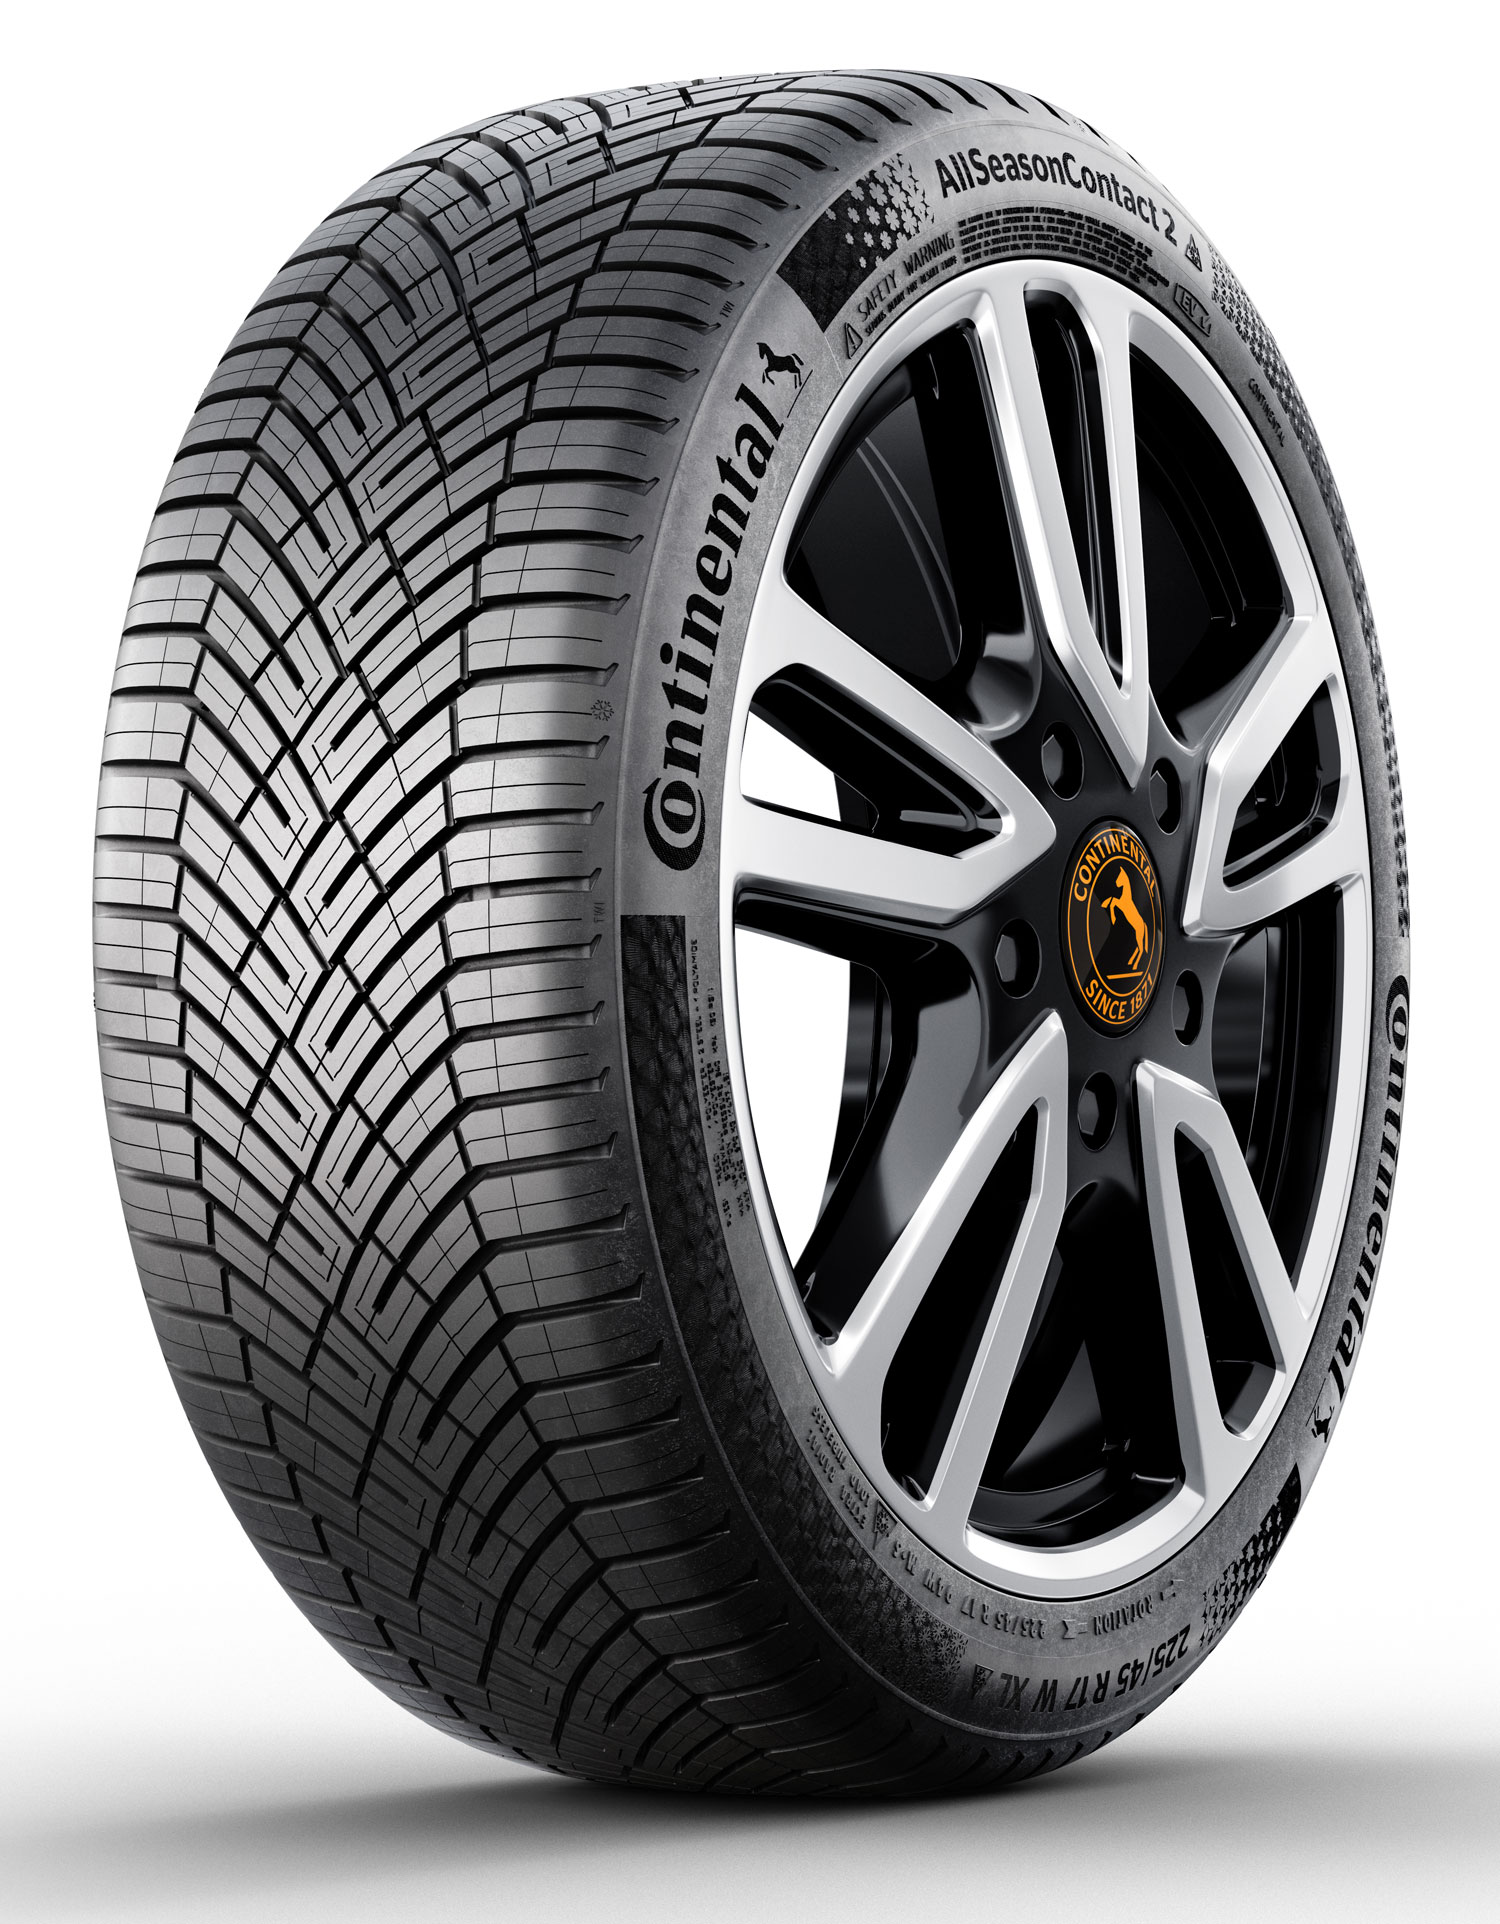 Gomme Nuove Continental 205/50 R17 93W AllSeasonContact 2 XL M+S pneumatici nuovi All Season